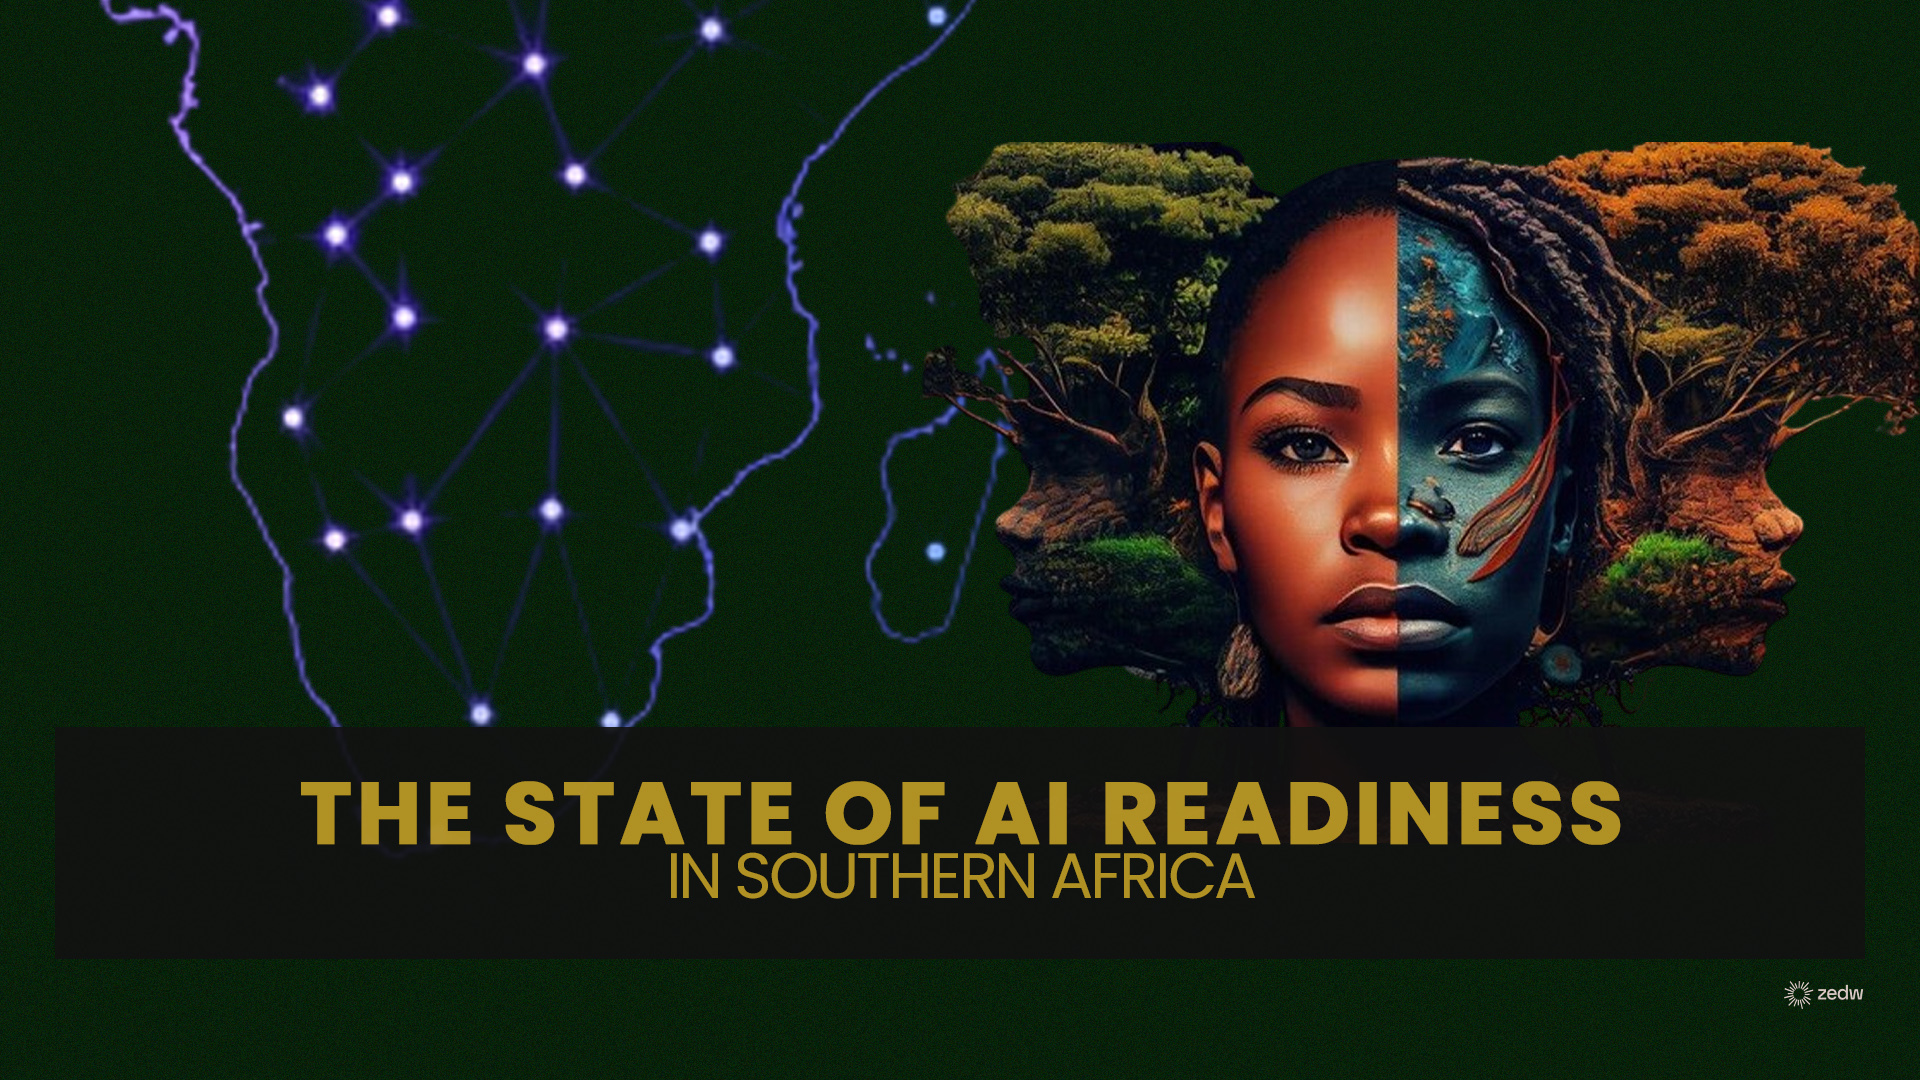 SADC countries & AI readiness: Who is most prepared for tech’s next frontier